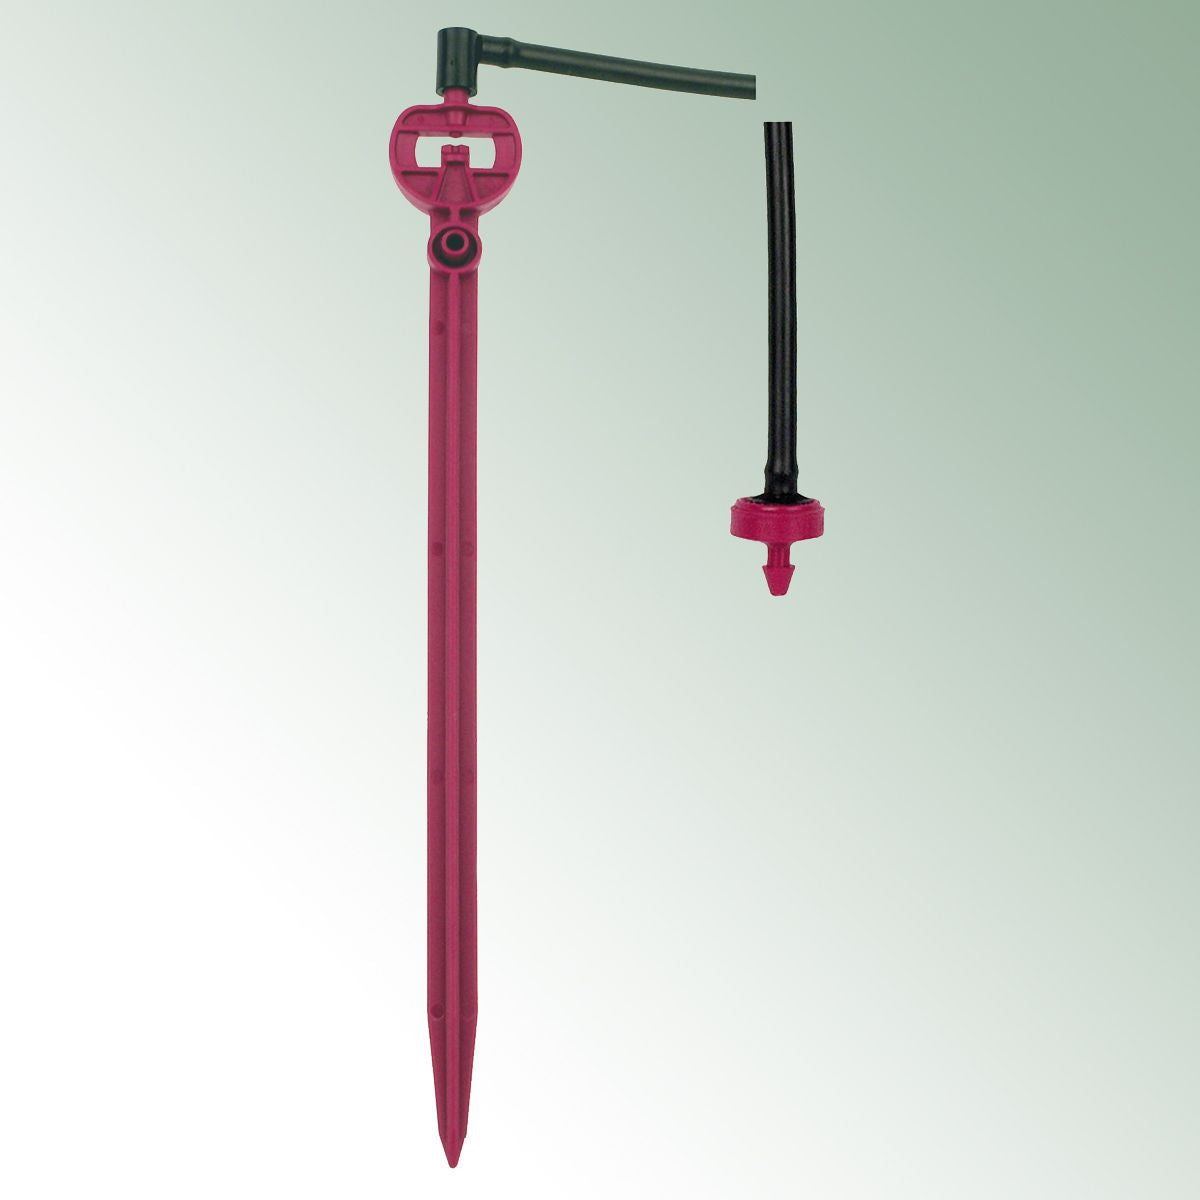 One-Sided Spray Stake with PC Junior Dripper assembled